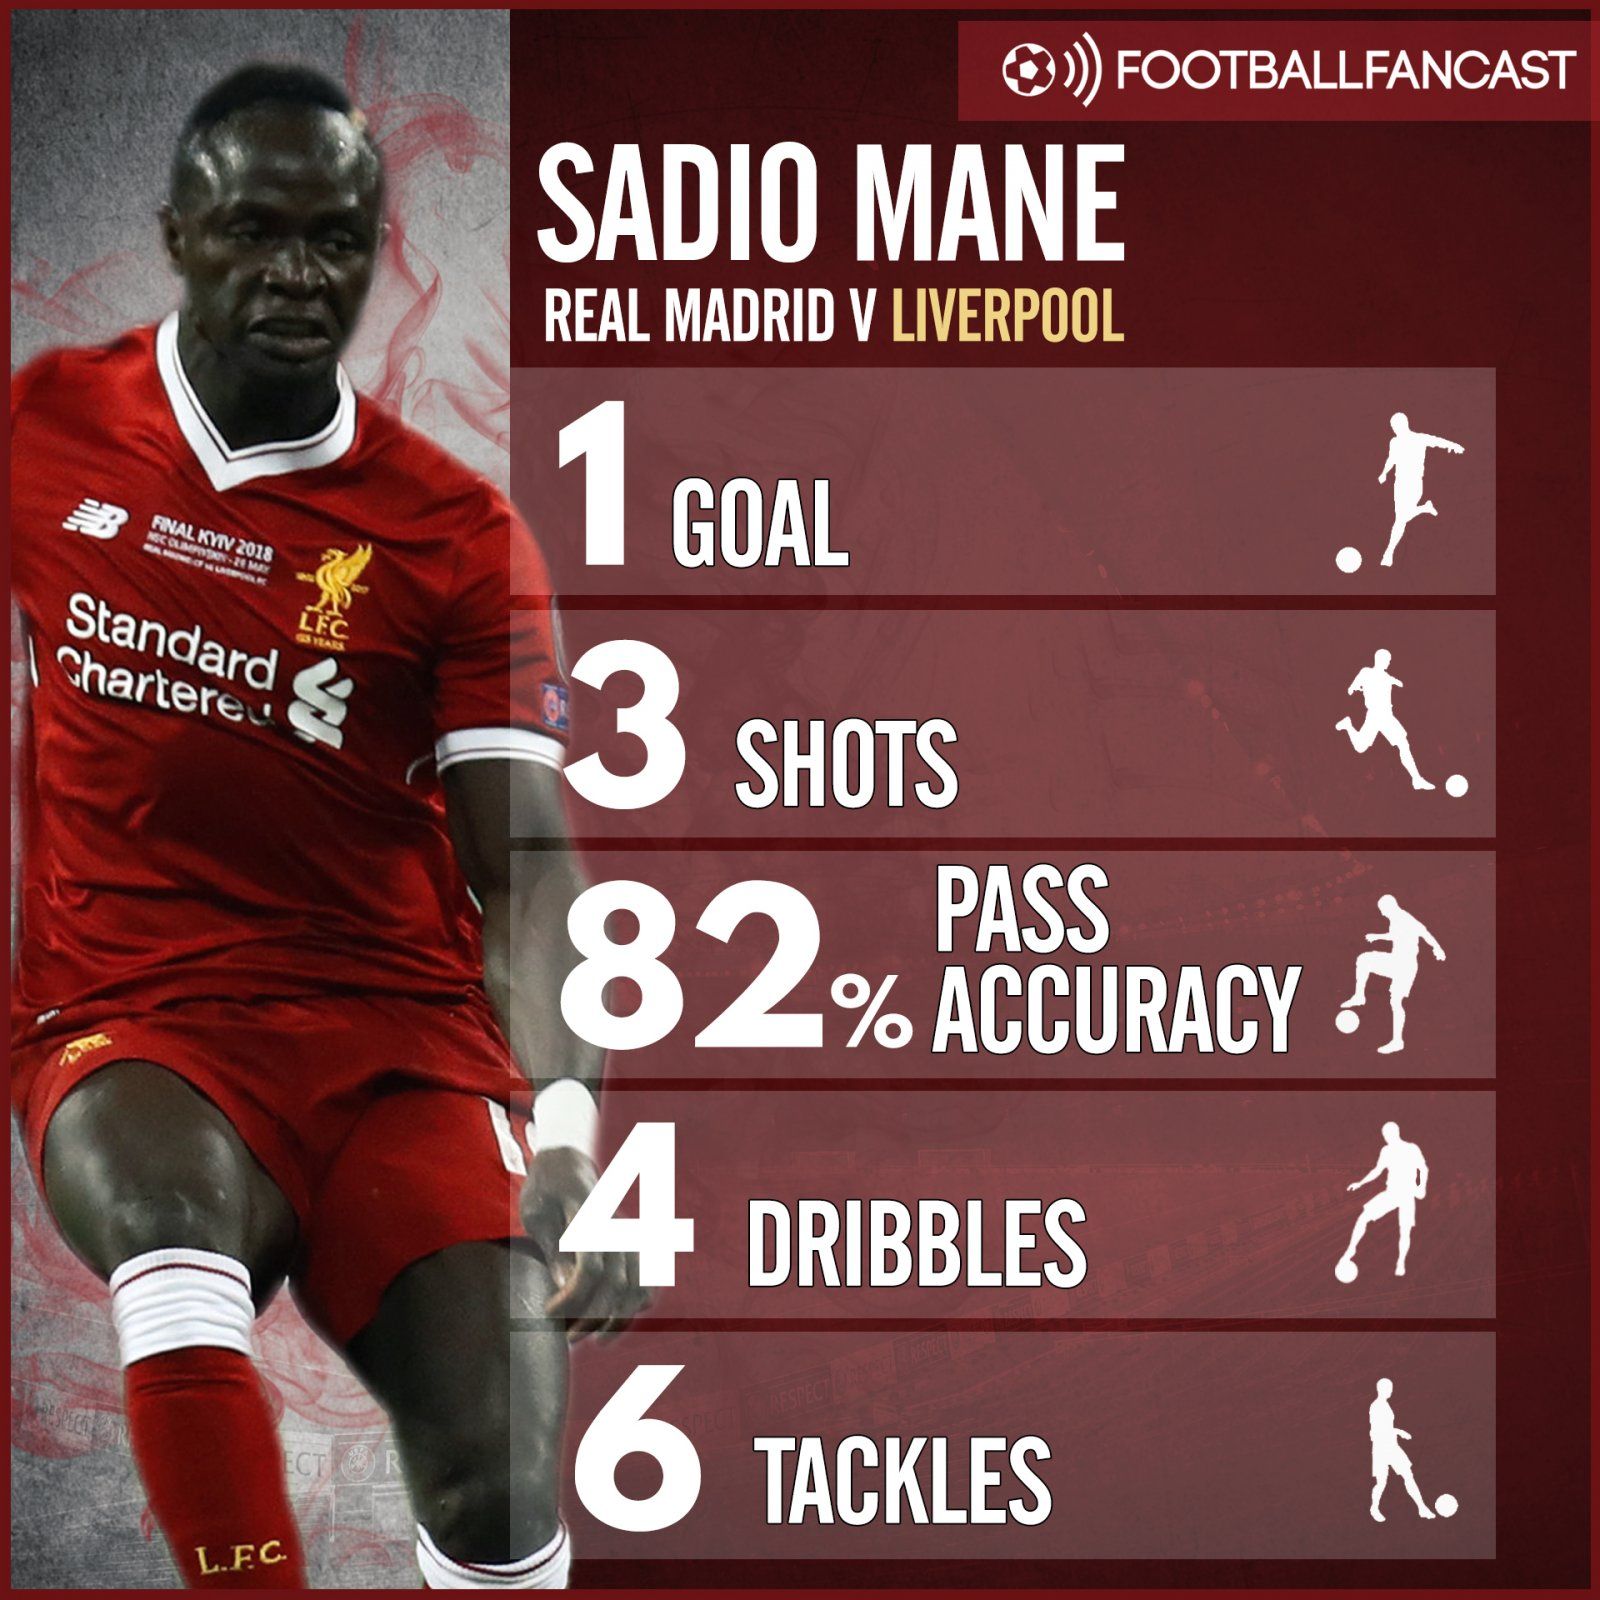 Sadio Mane's stats from the Champions League final